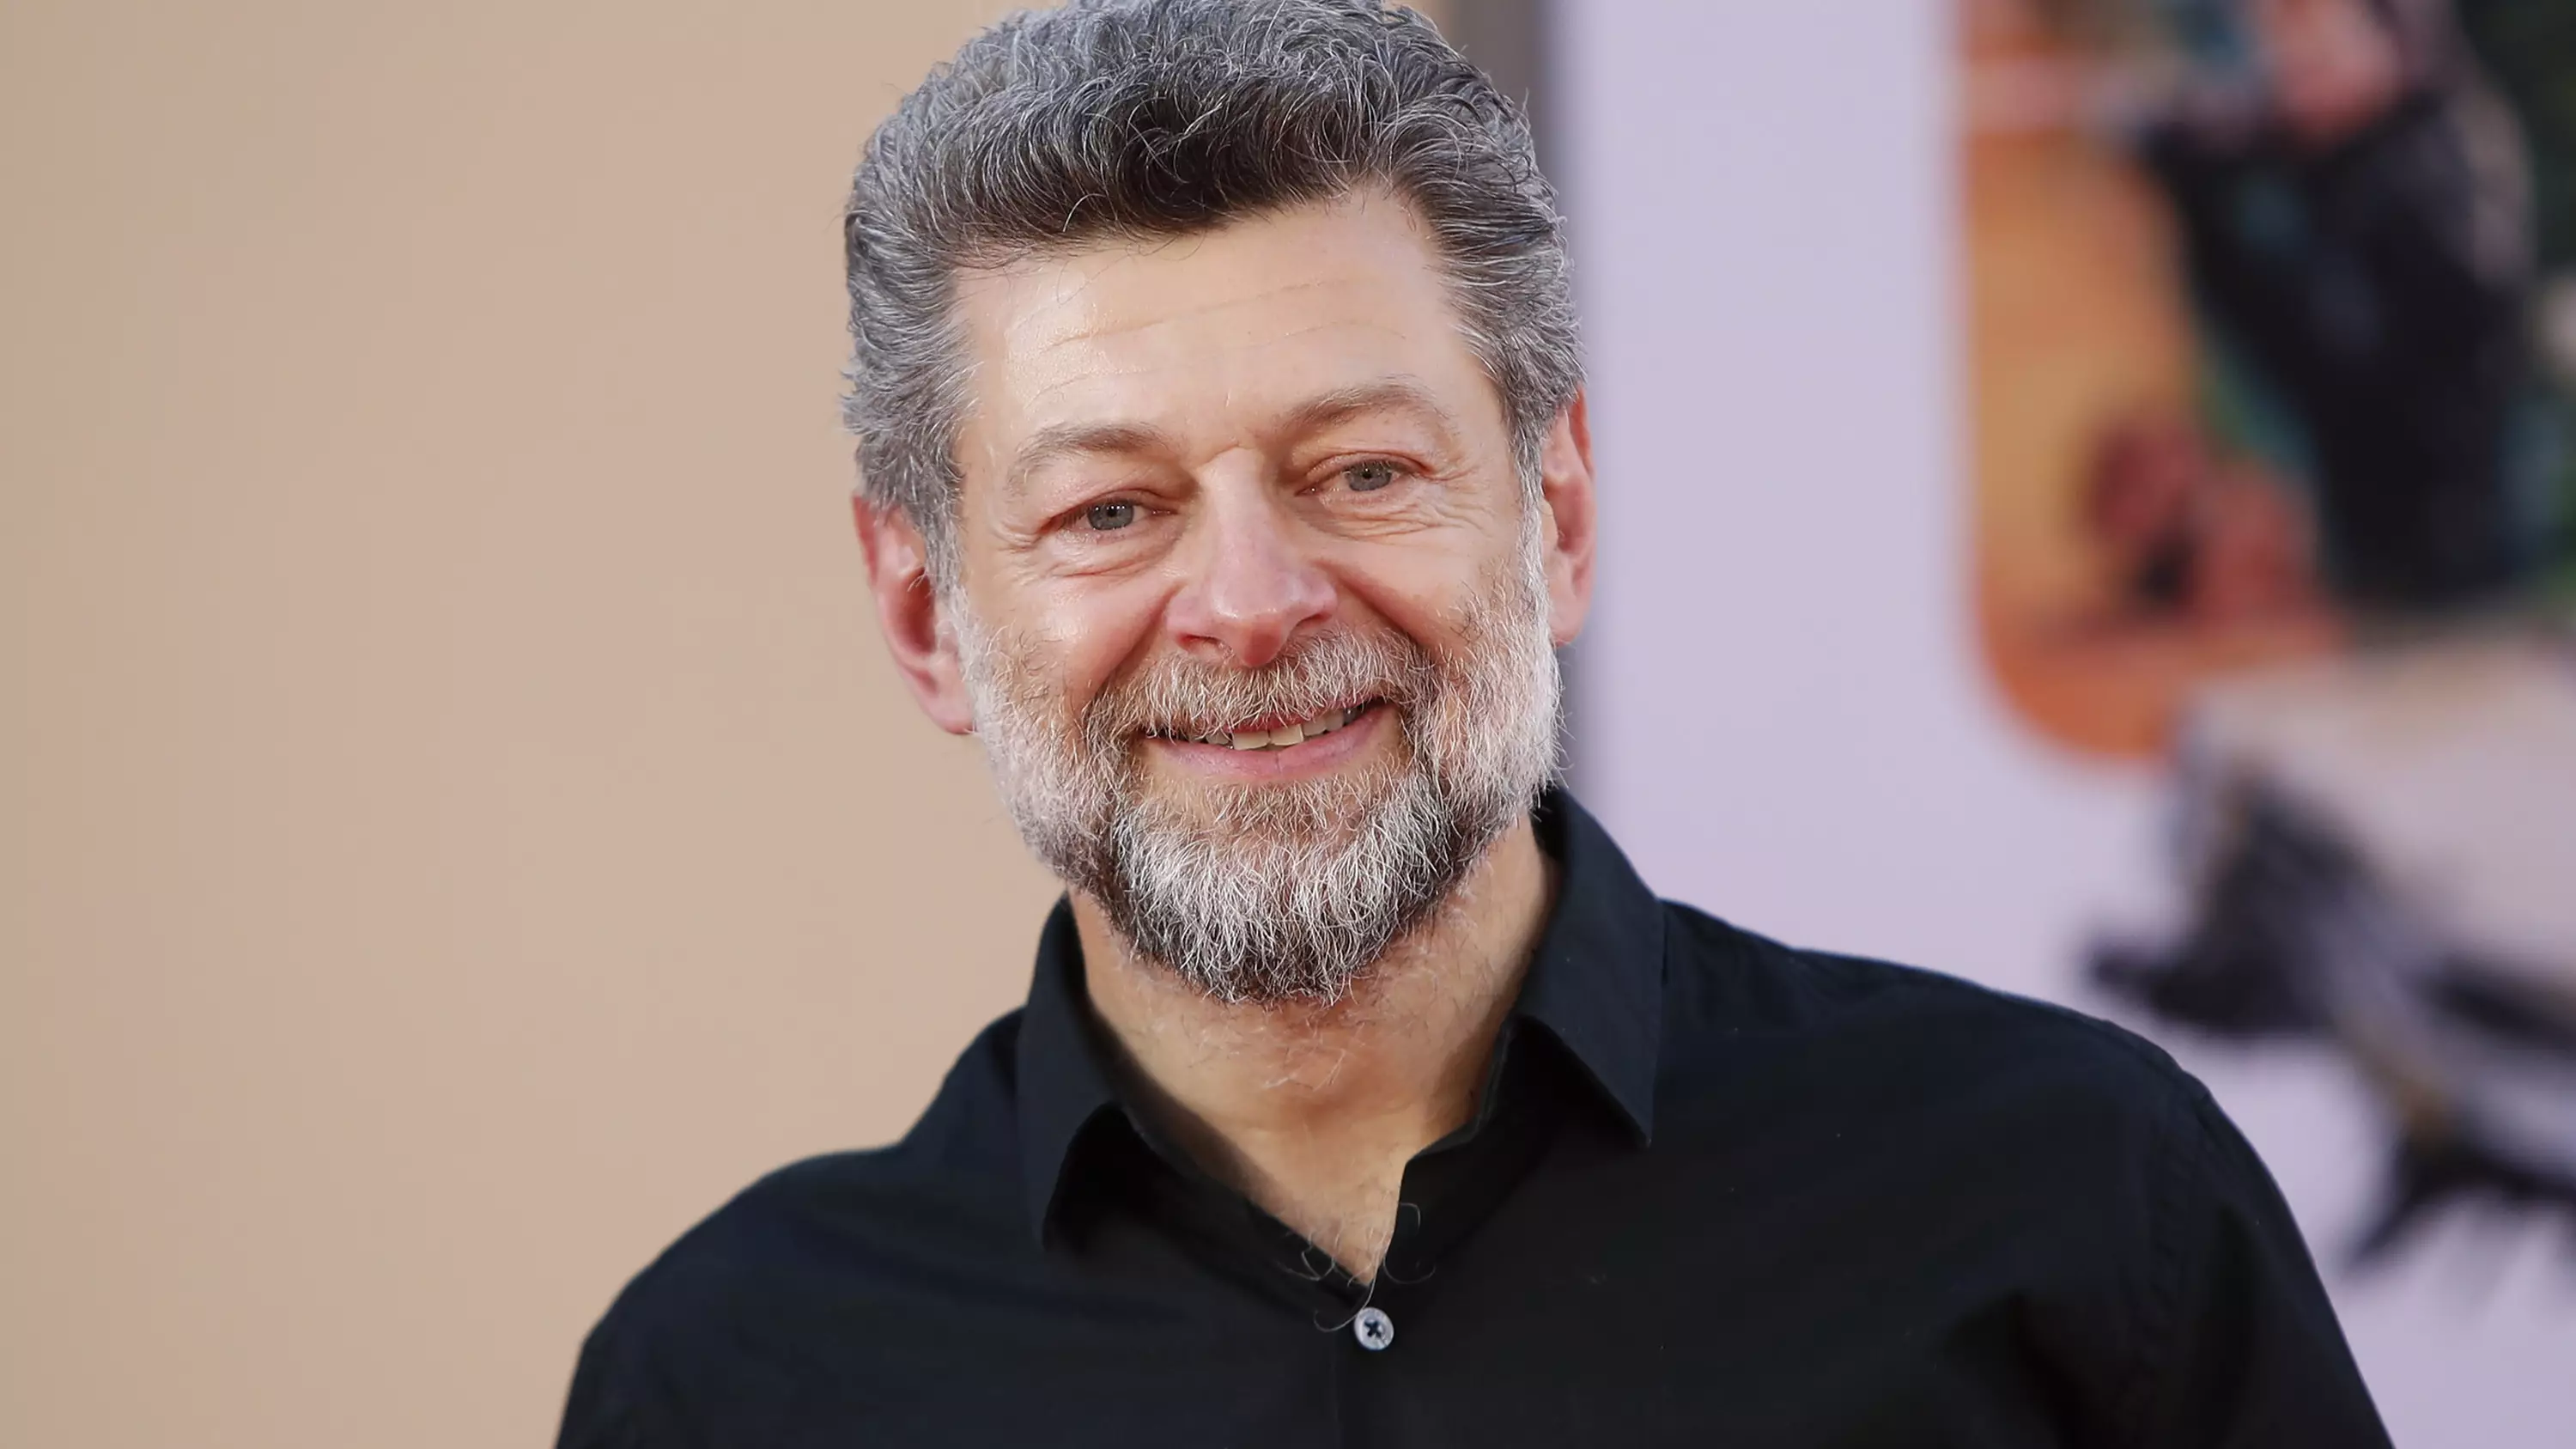 Gollum Voice Actor Andy Serkis To Narrate New ‘The Lord Of The Rings’ Audiobooks